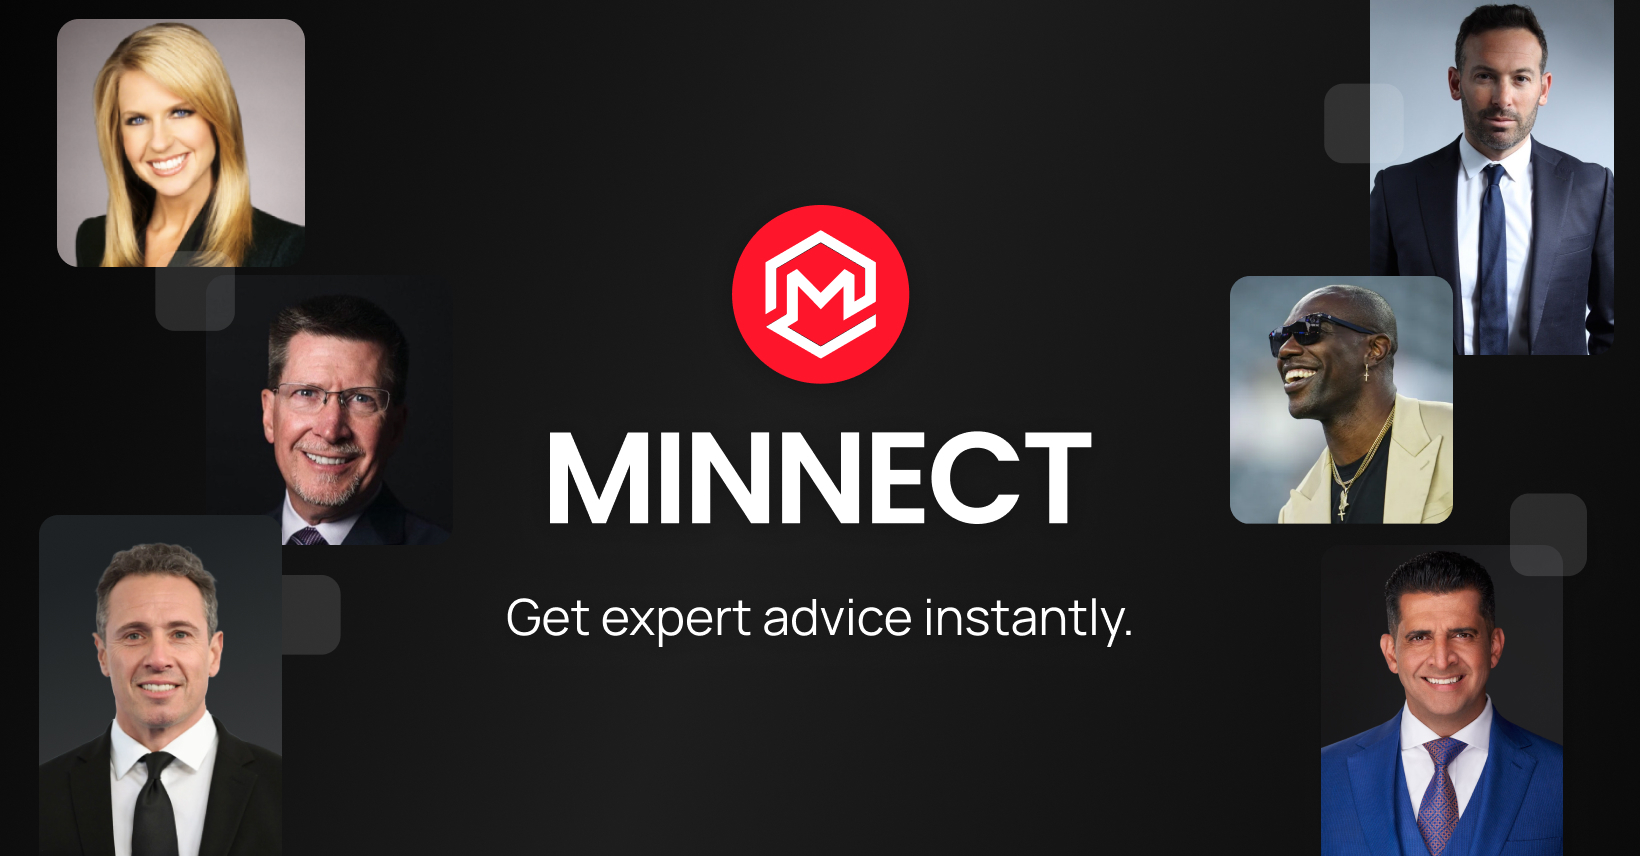 Ready go to ... https://minnect.com/ Get Expert Advice Instantly - Minnect